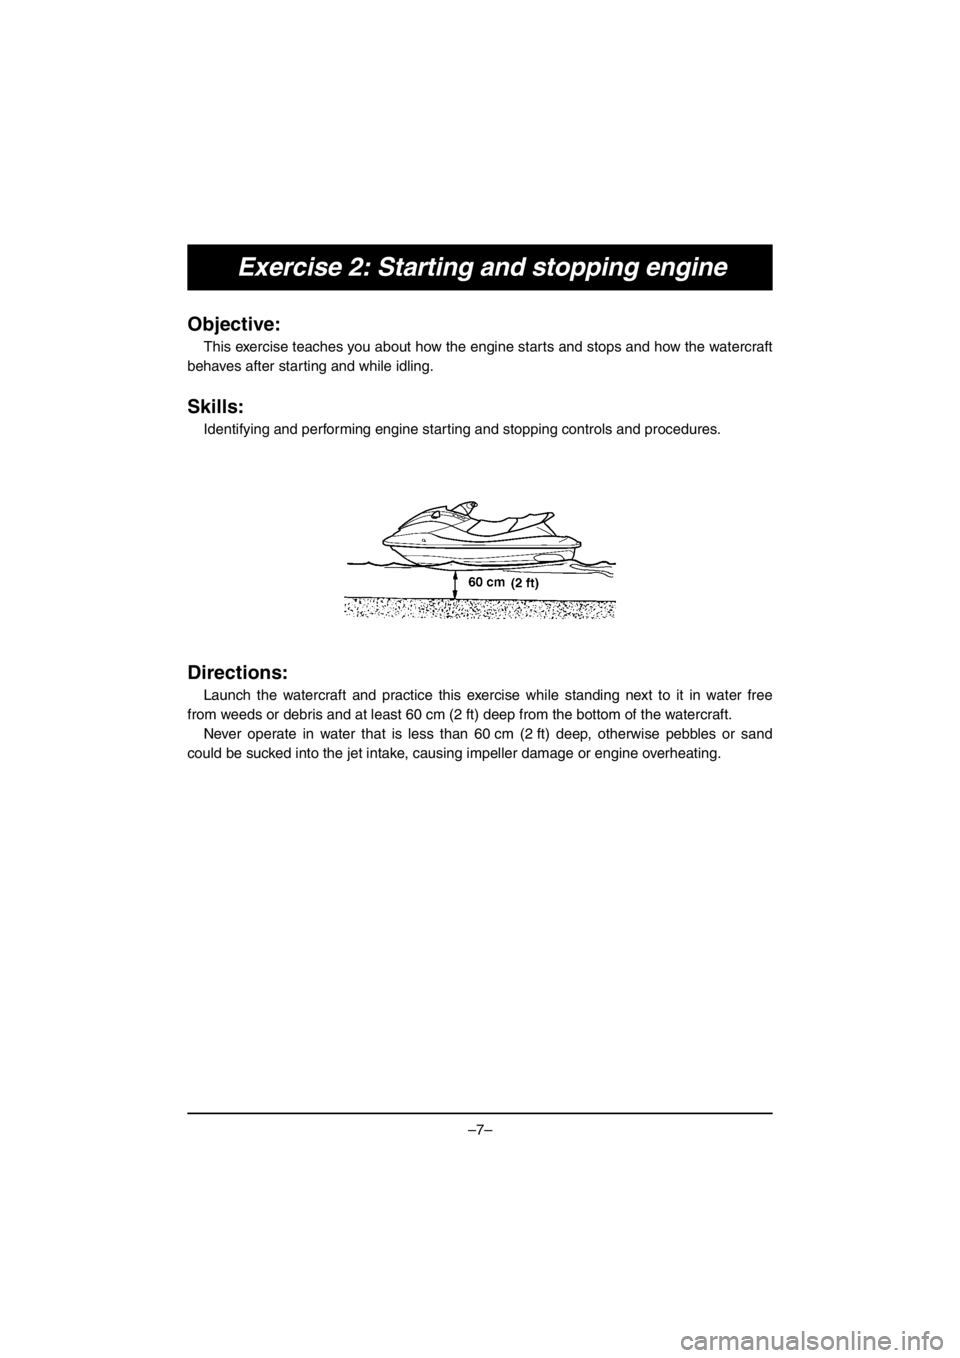 YAMAHA EX SPORT 2017  Manual de utilização (in Portuguese) –7–
Exercise 2: Starting and stopping engine
Objective:
This exercise teaches you about how the engine starts and stops and how the watercraft
behaves after starting and while idling.
Skills:
Iden